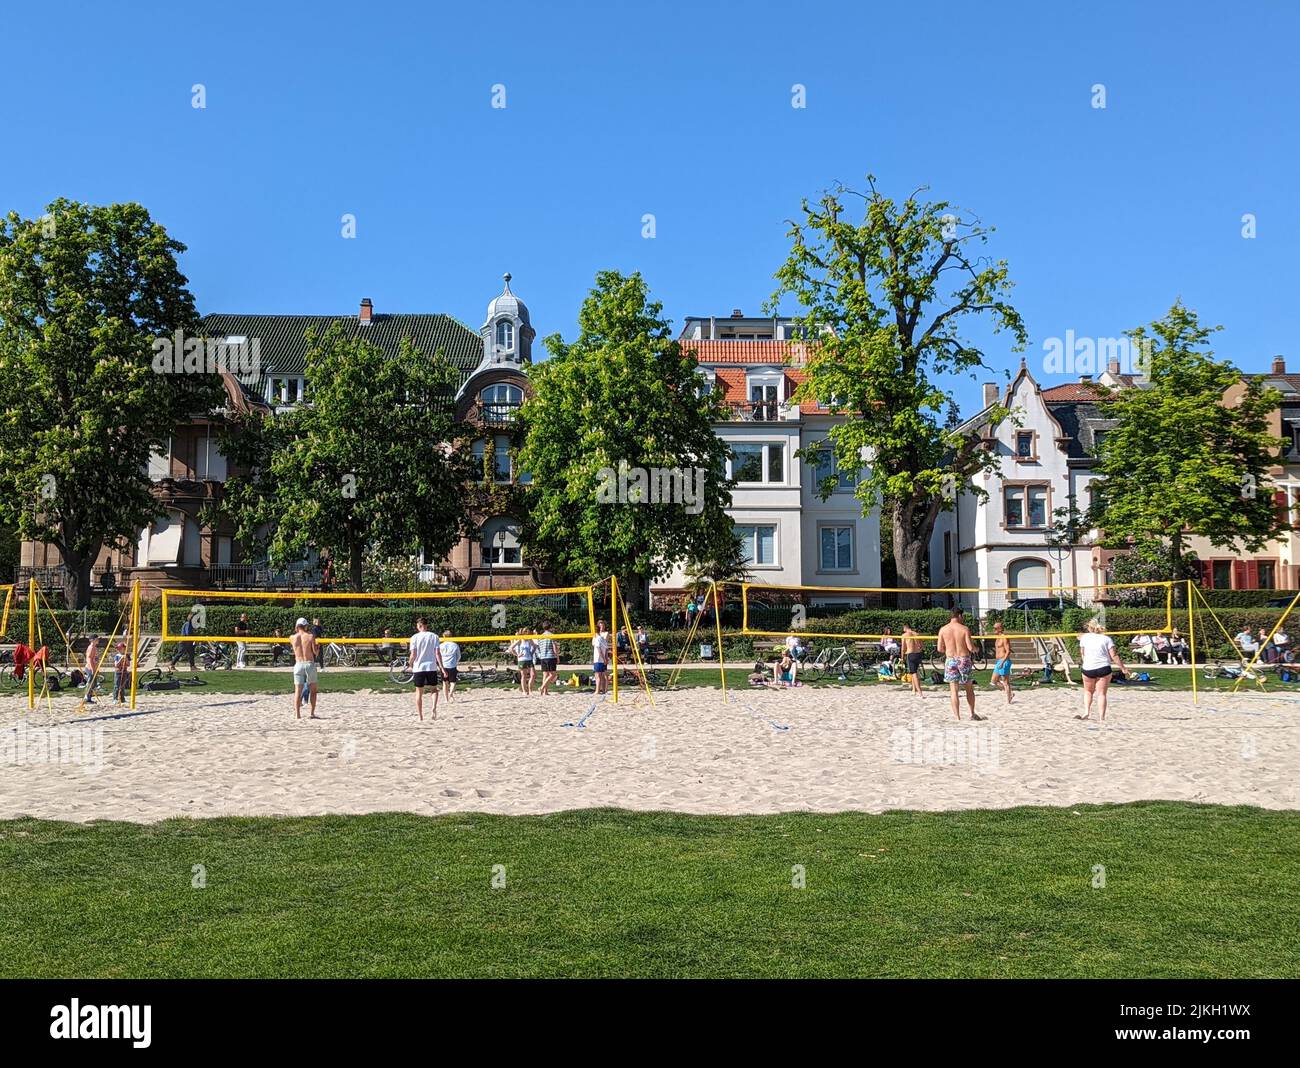 The people playing in a beach volleyball court against villas and a tree avenue in Neckarwiese park, Heidelberg, Germany Stock Photo